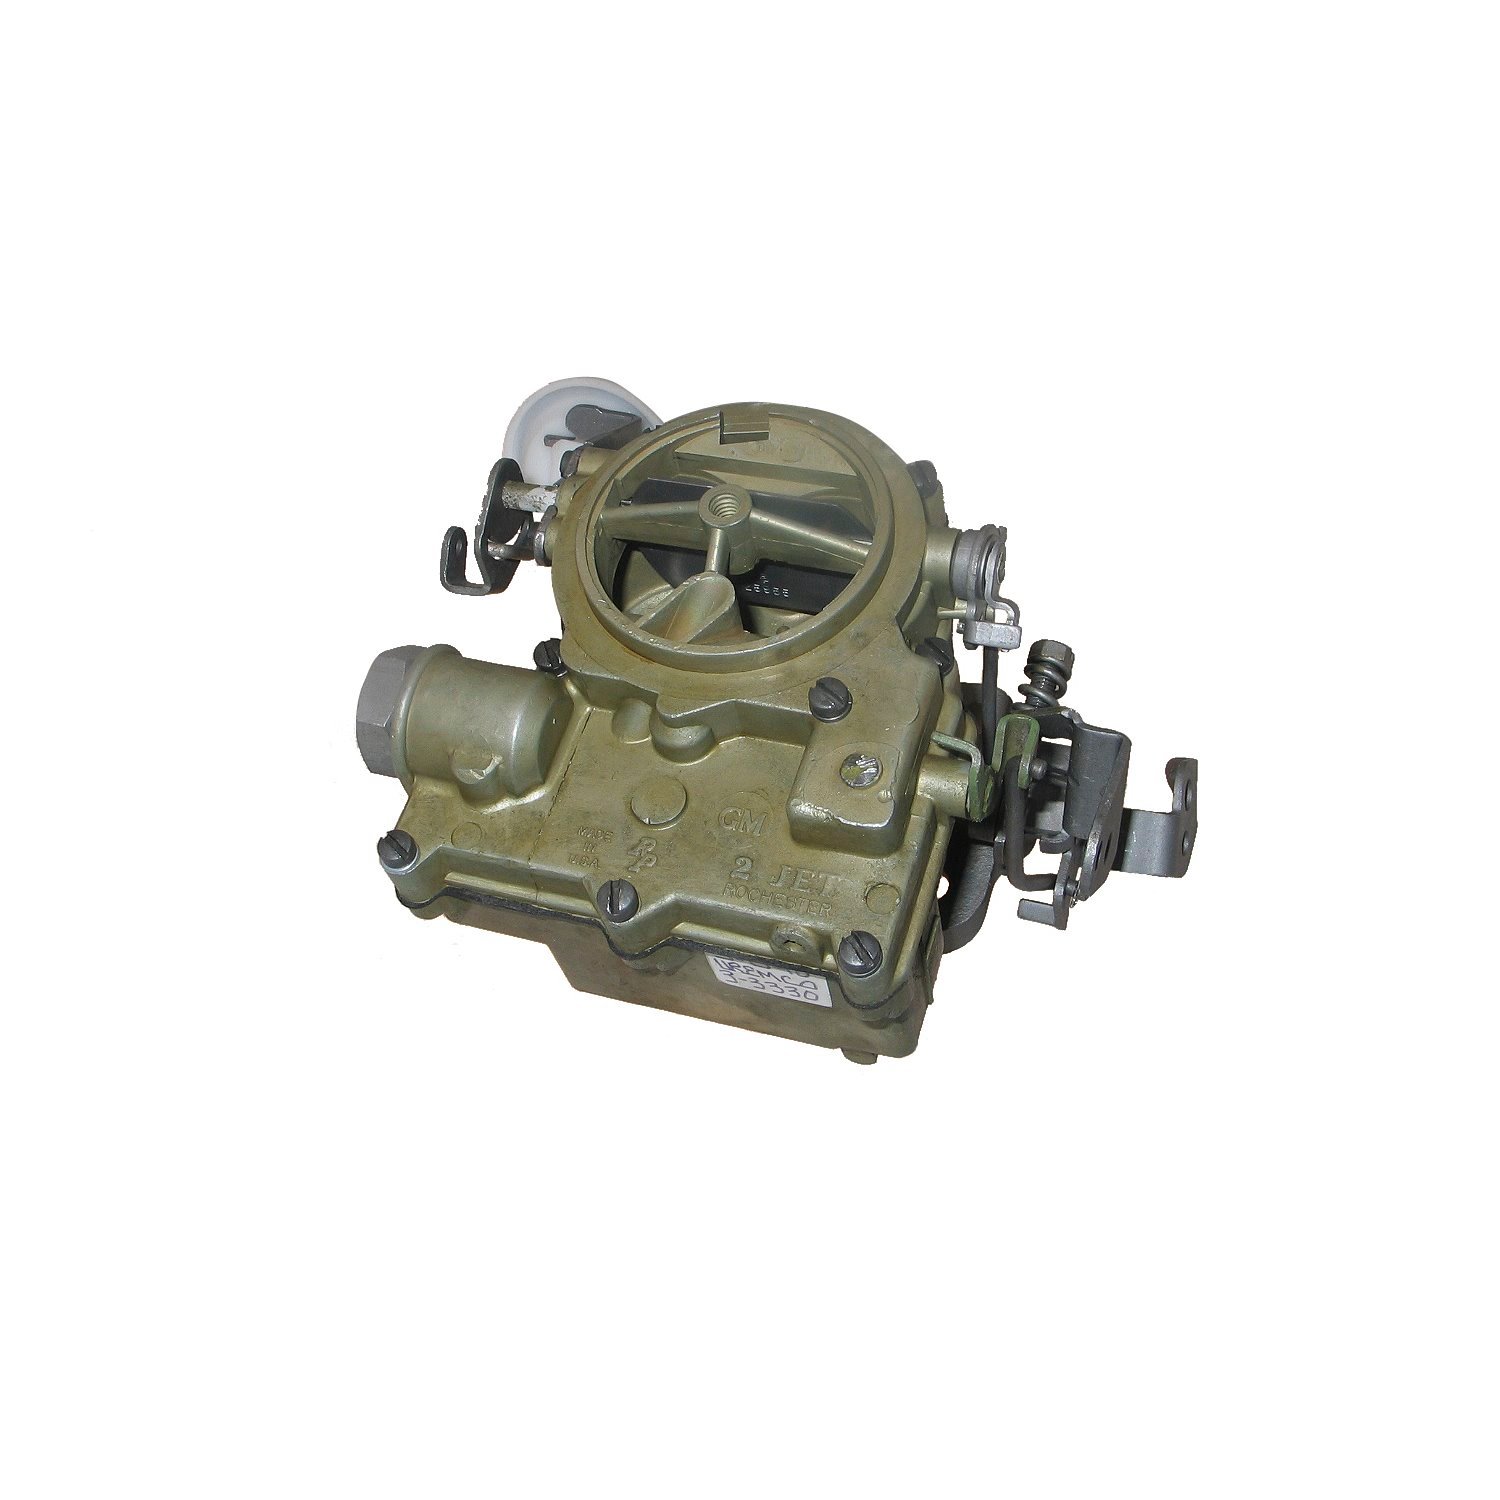 3-3430 Rochester Remanufactured Carburetor, 2G -Style